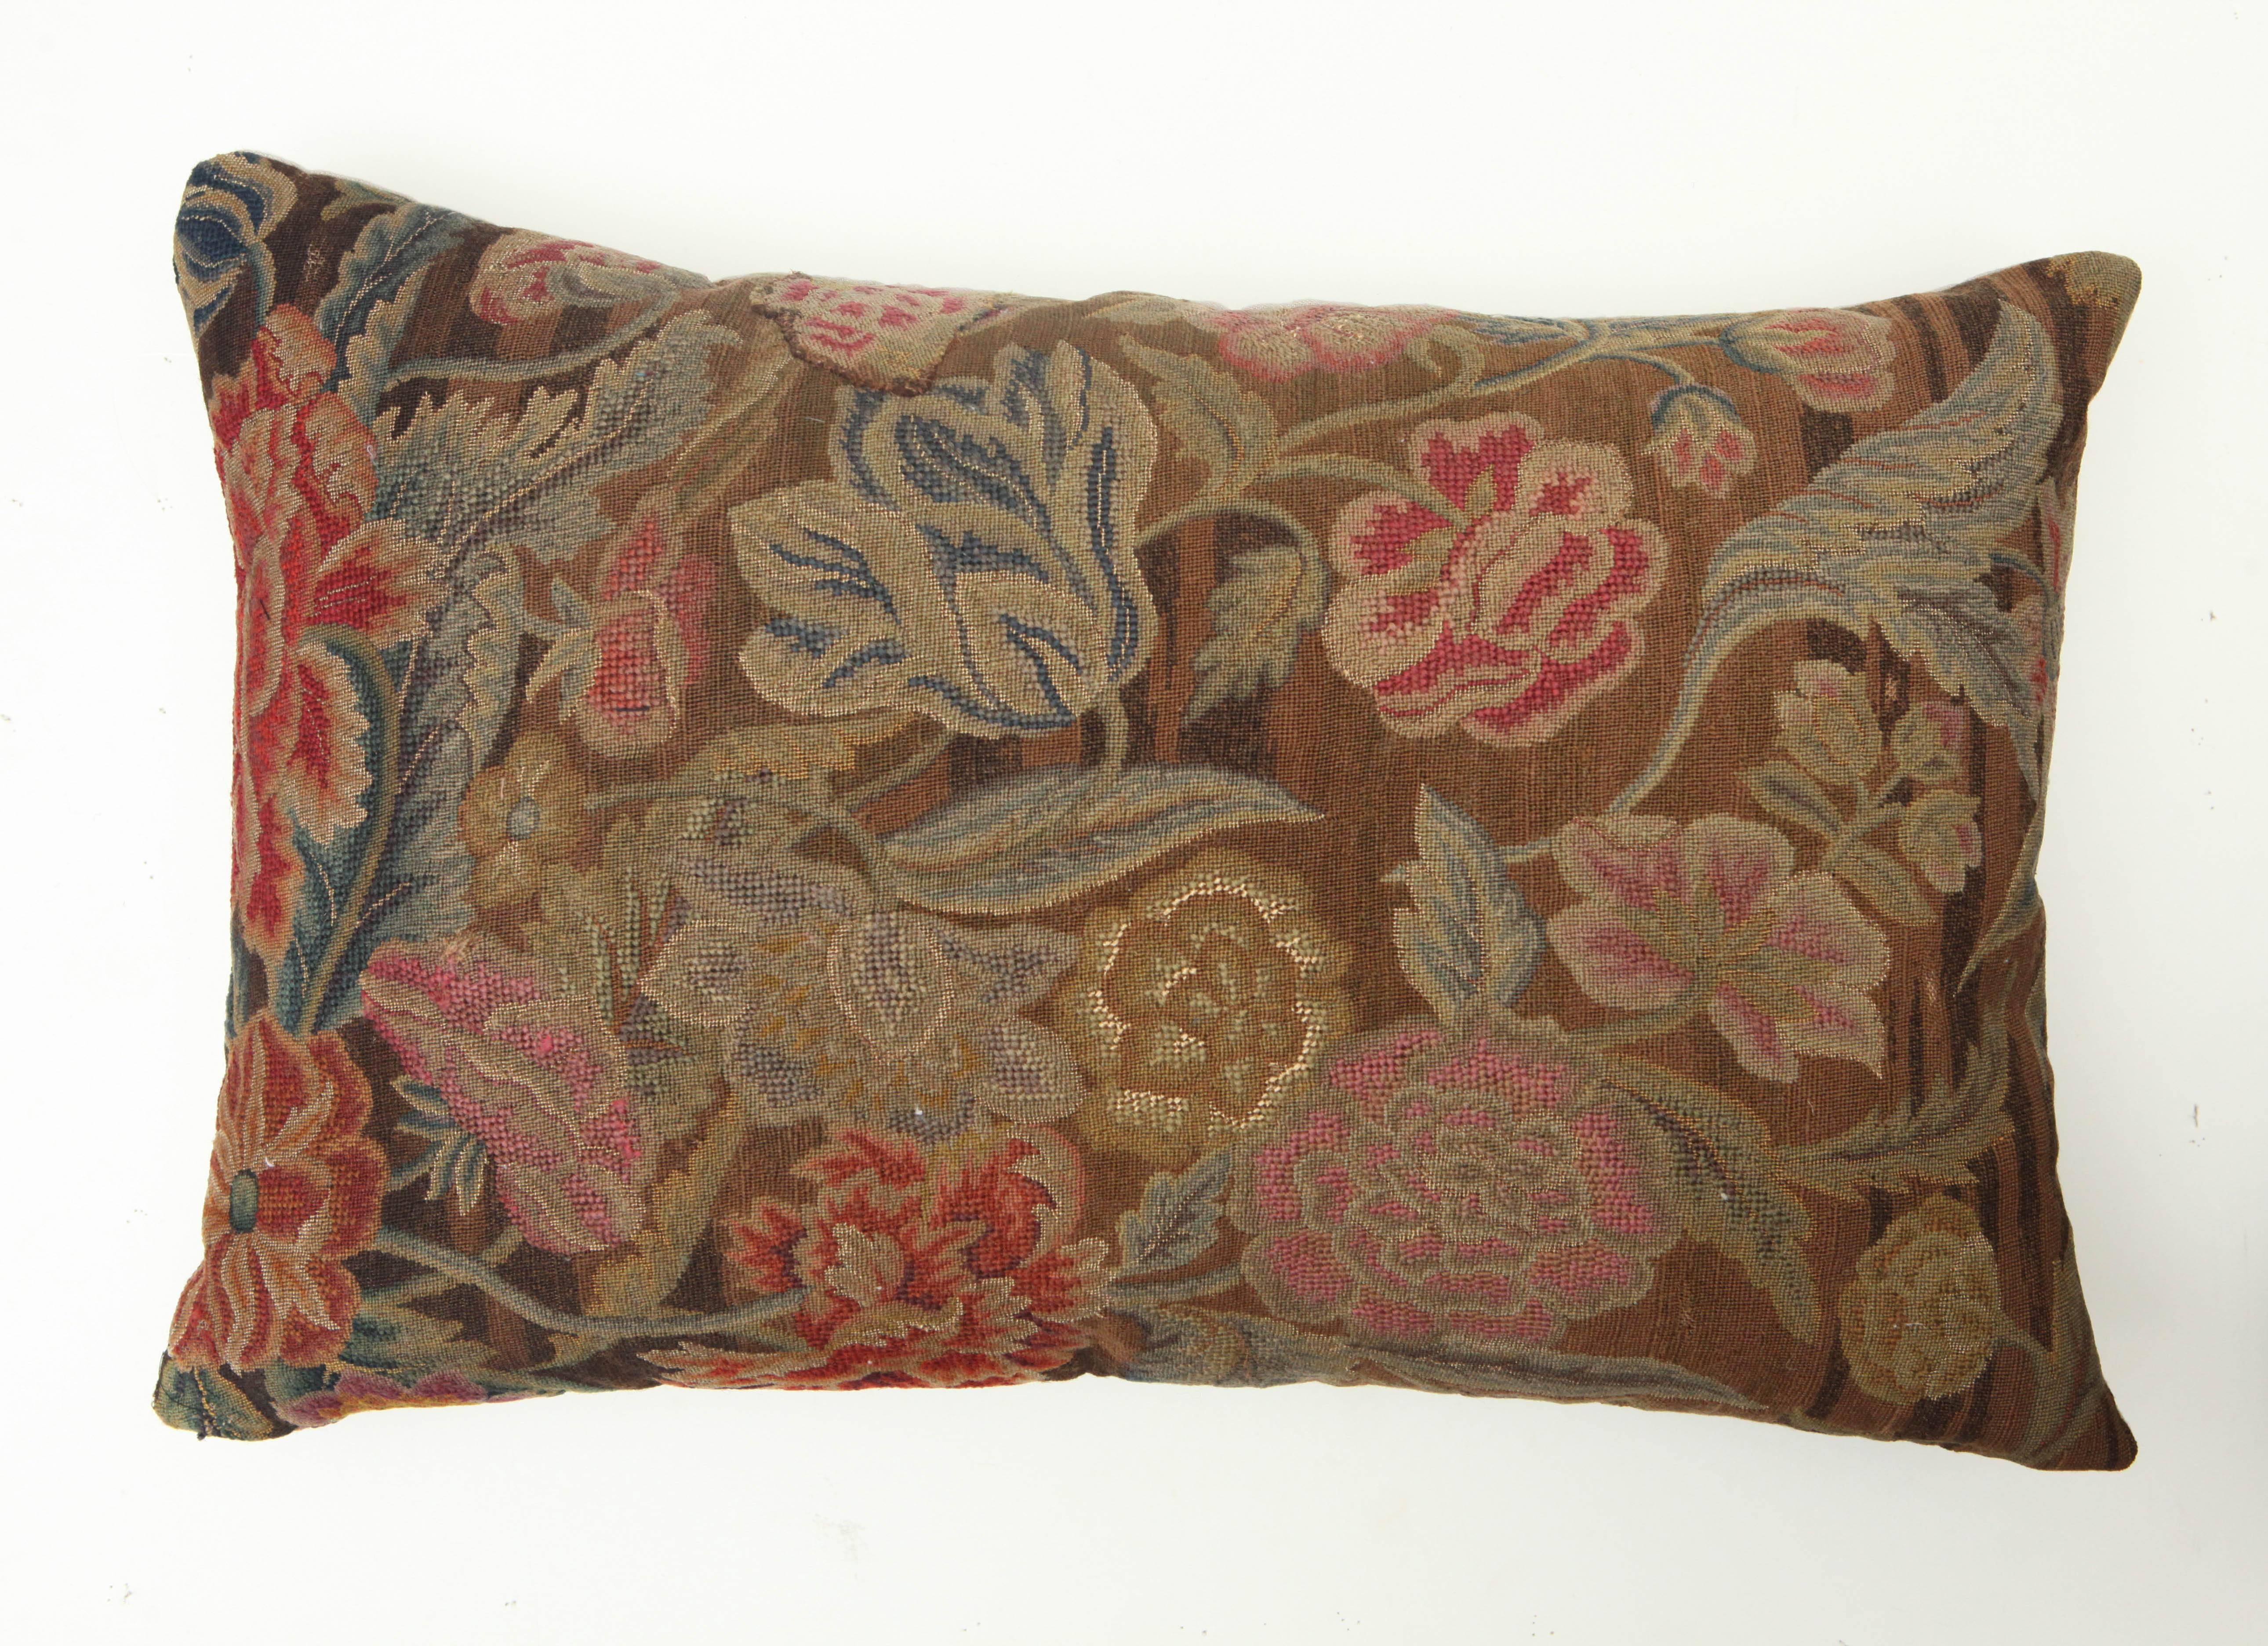 All over floral design in red, pink and blue on a brown varigated background.
Natural Linen backing. Feather and down fill. Invisible zipper.